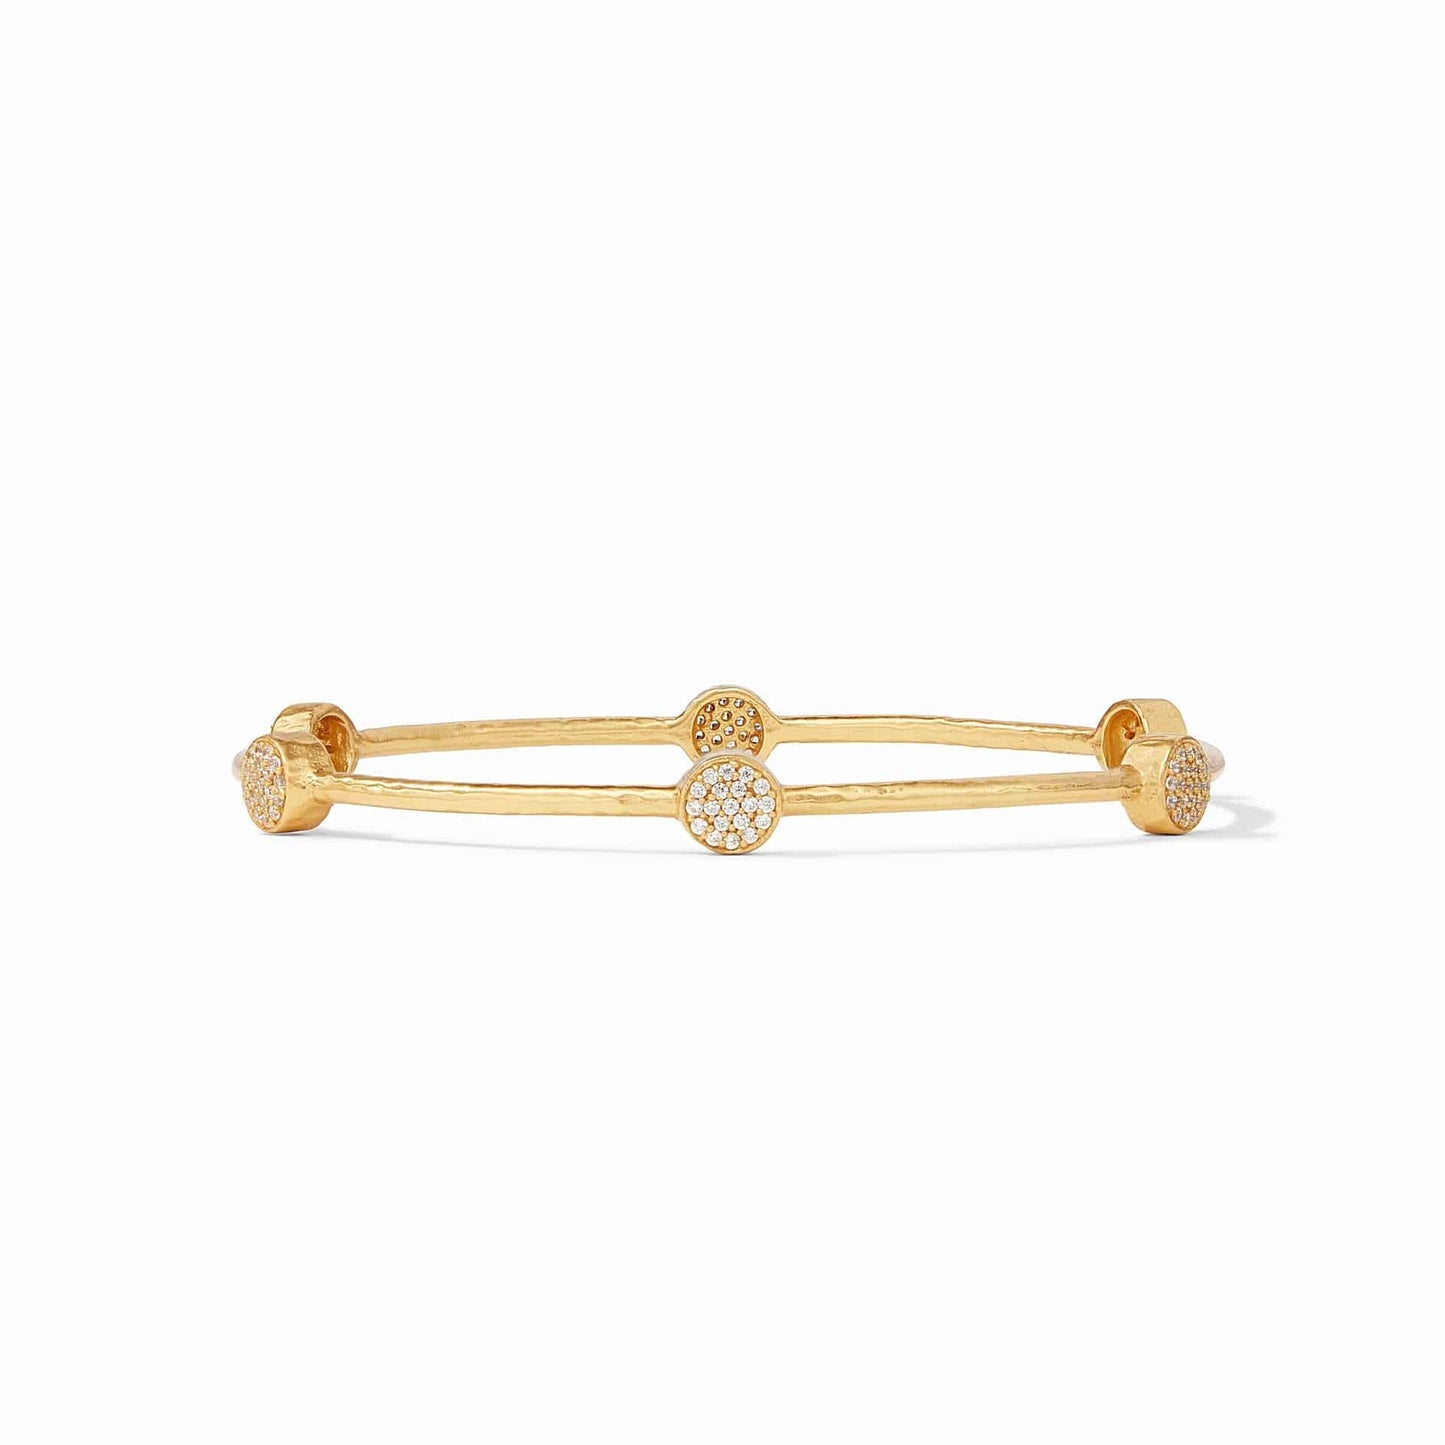 JULIE VOS - MILANO LUXE BANGLE G PAVE CZ MD - Findlay Rowe Designs